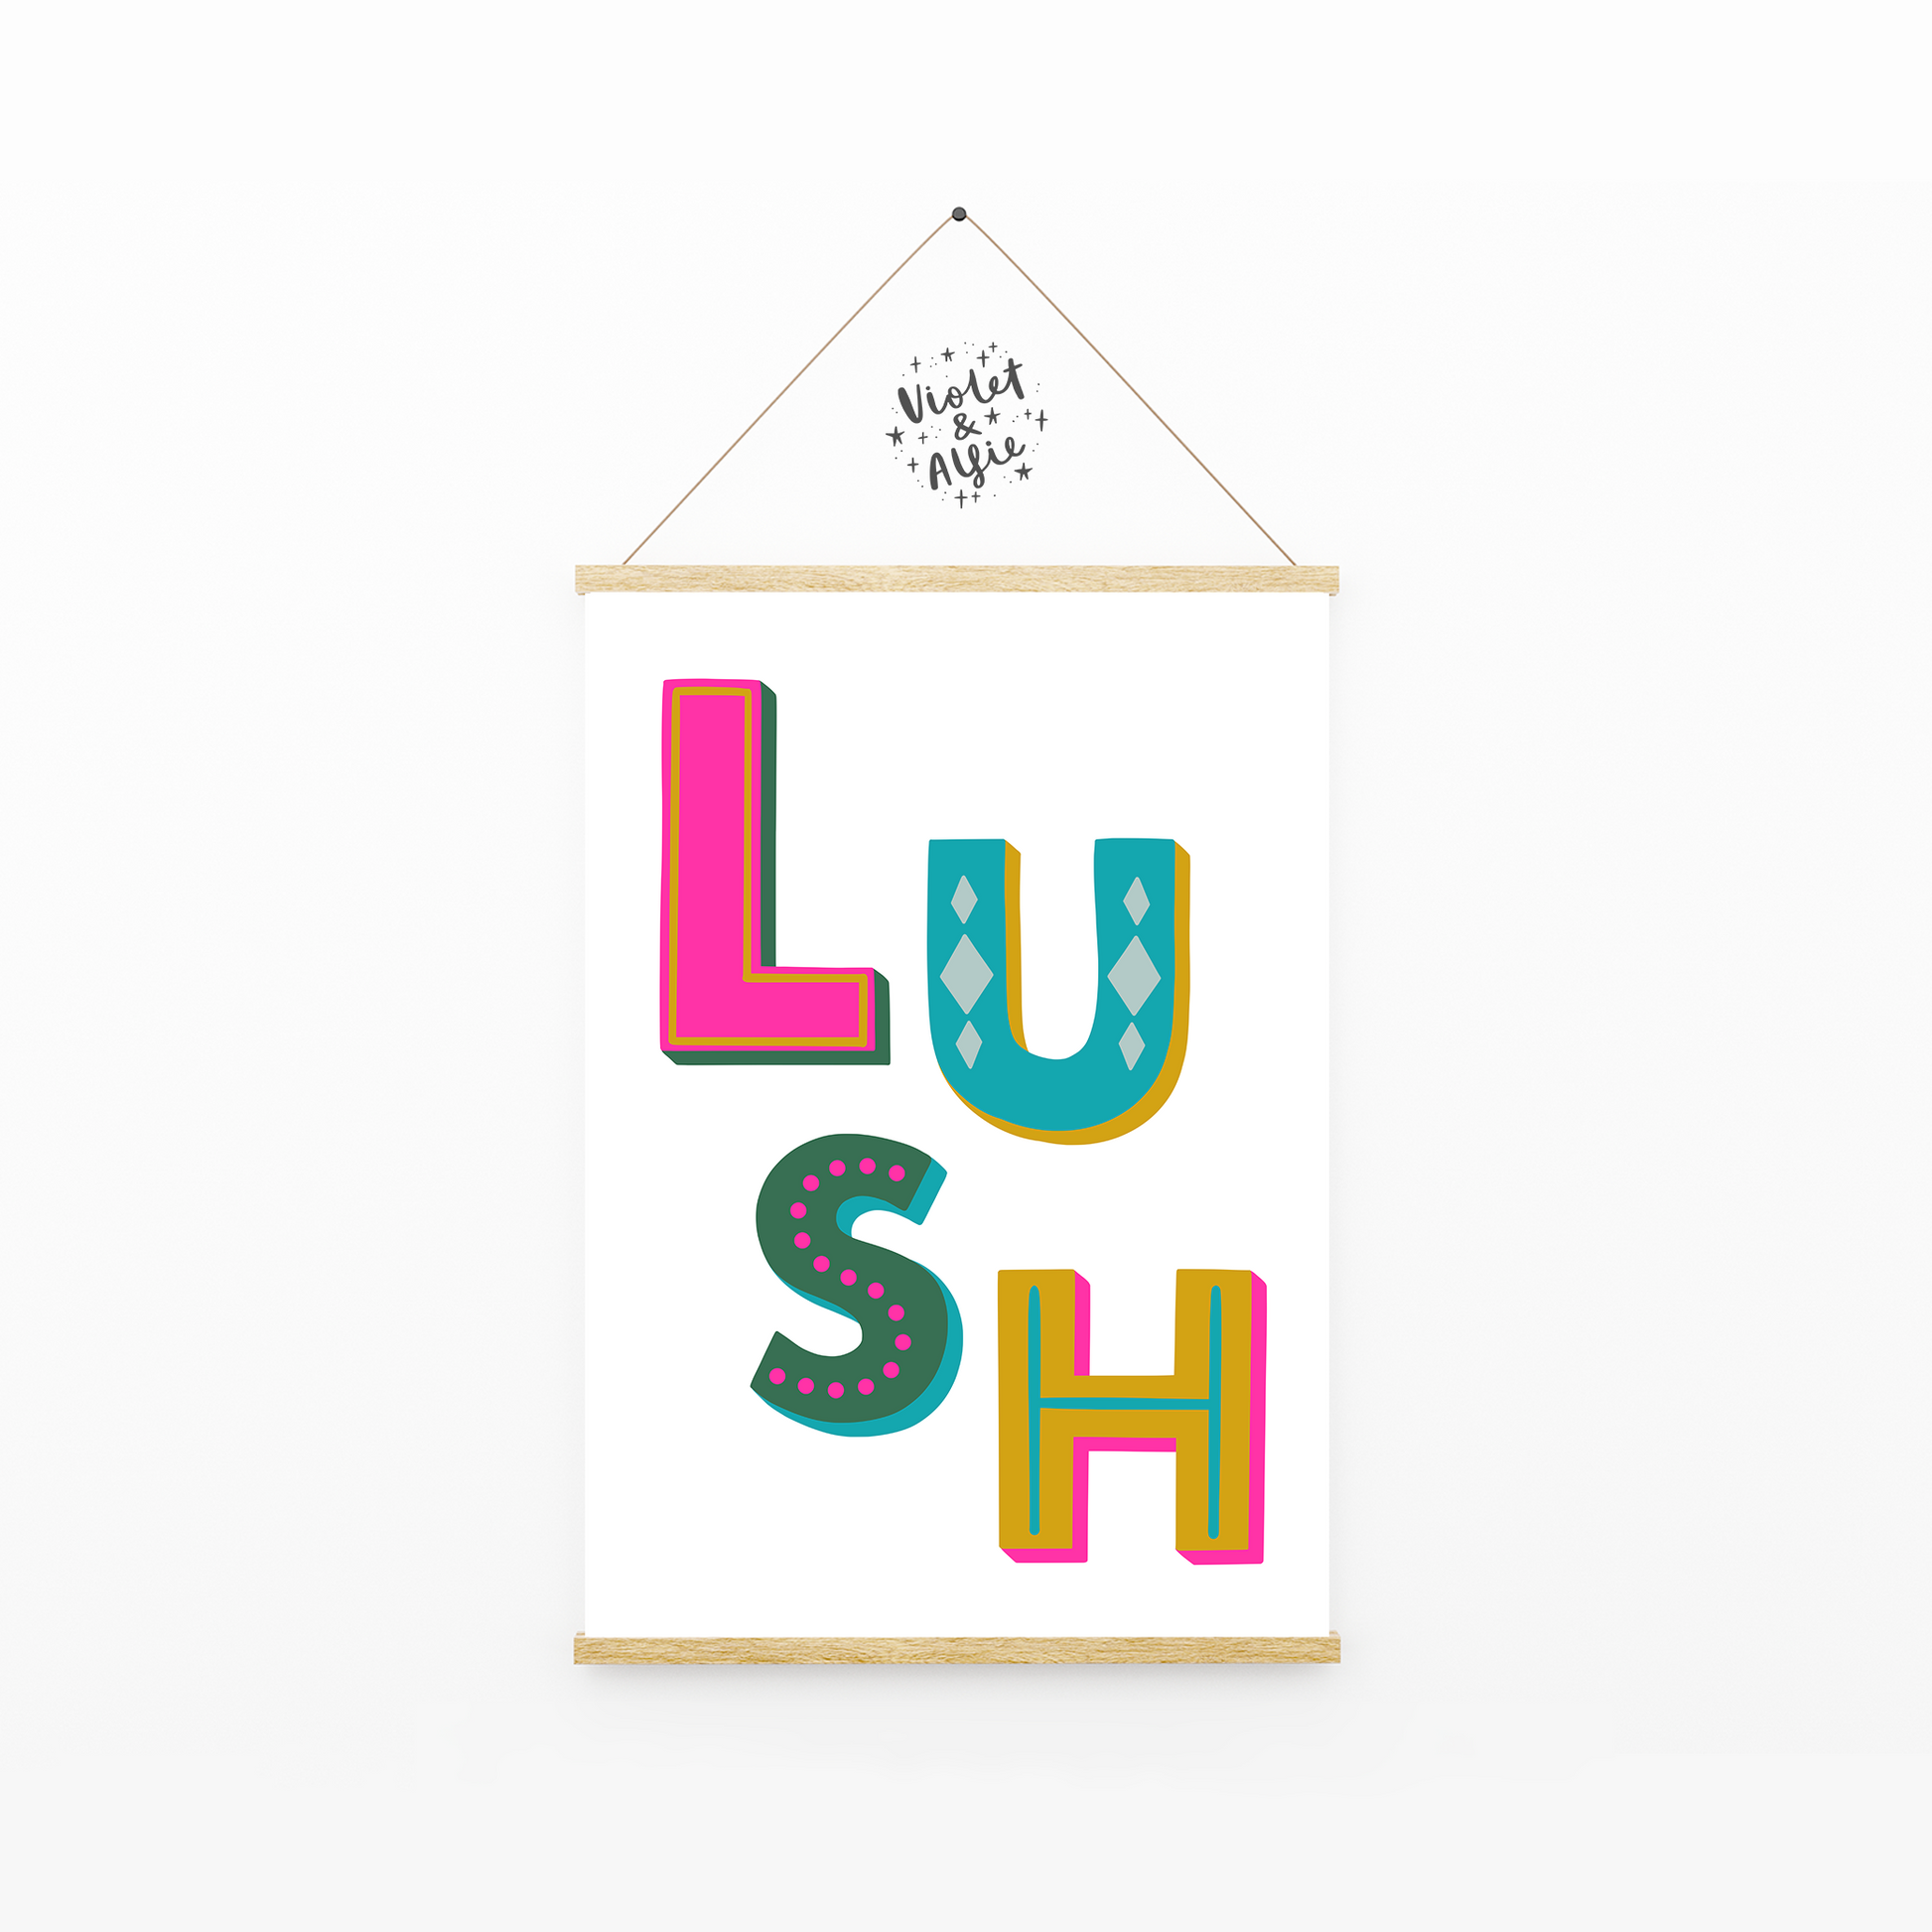 Lush print, South West slang, modern boho decor, eclectic home vibe prints, Typographic print, colourful typography, eclectic home decor, bold wall art, quirky prints, typographic magic print, maximalist home decor, clashing colours, prints for your home, quirky prints, gallery wall decor